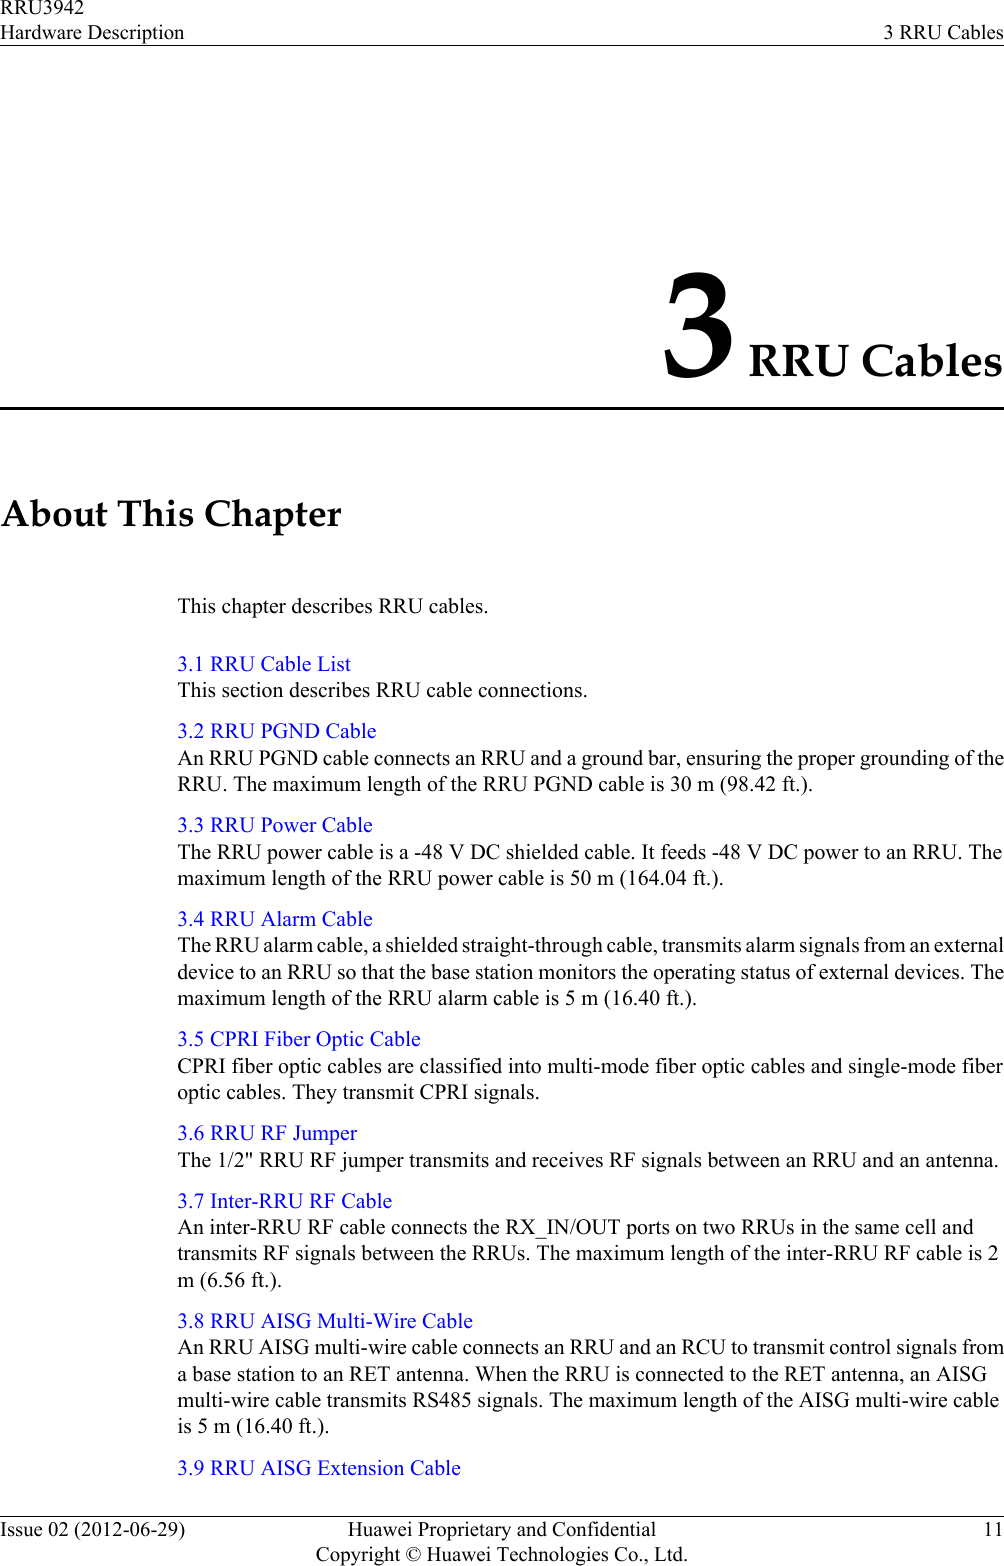 3 RRU CablesAbout This ChapterThis chapter describes RRU cables.3.1 RRU Cable ListThis section describes RRU cable connections.3.2 RRU PGND CableAn RRU PGND cable connects an RRU and a ground bar, ensuring the proper grounding of theRRU. The maximum length of the RRU PGND cable is 30 m (98.42 ft.).3.3 RRU Power CableThe RRU power cable is a -48 V DC shielded cable. It feeds -48 V DC power to an RRU. Themaximum length of the RRU power cable is 50 m (164.04 ft.).3.4 RRU Alarm CableThe RRU alarm cable, a shielded straight-through cable, transmits alarm signals from an externaldevice to an RRU so that the base station monitors the operating status of external devices. Themaximum length of the RRU alarm cable is 5 m (16.40 ft.).3.5 CPRI Fiber Optic CableCPRI fiber optic cables are classified into multi-mode fiber optic cables and single-mode fiberoptic cables. They transmit CPRI signals.3.6 RRU RF JumperThe 1/2&quot; RRU RF jumper transmits and receives RF signals between an RRU and an antenna.3.7 Inter-RRU RF CableAn inter-RRU RF cable connects the RX_IN/OUT ports on two RRUs in the same cell andtransmits RF signals between the RRUs. The maximum length of the inter-RRU RF cable is 2m (6.56 ft.).3.8 RRU AISG Multi-Wire CableAn RRU AISG multi-wire cable connects an RRU and an RCU to transmit control signals froma base station to an RET antenna. When the RRU is connected to the RET antenna, an AISGmulti-wire cable transmits RS485 signals. The maximum length of the AISG multi-wire cableis 5 m (16.40 ft.).3.9 RRU AISG Extension CableRRU3942Hardware Description 3 RRU CablesIssue 02 (2012-06-29) Huawei Proprietary and ConfidentialCopyright © Huawei Technologies Co., Ltd.11